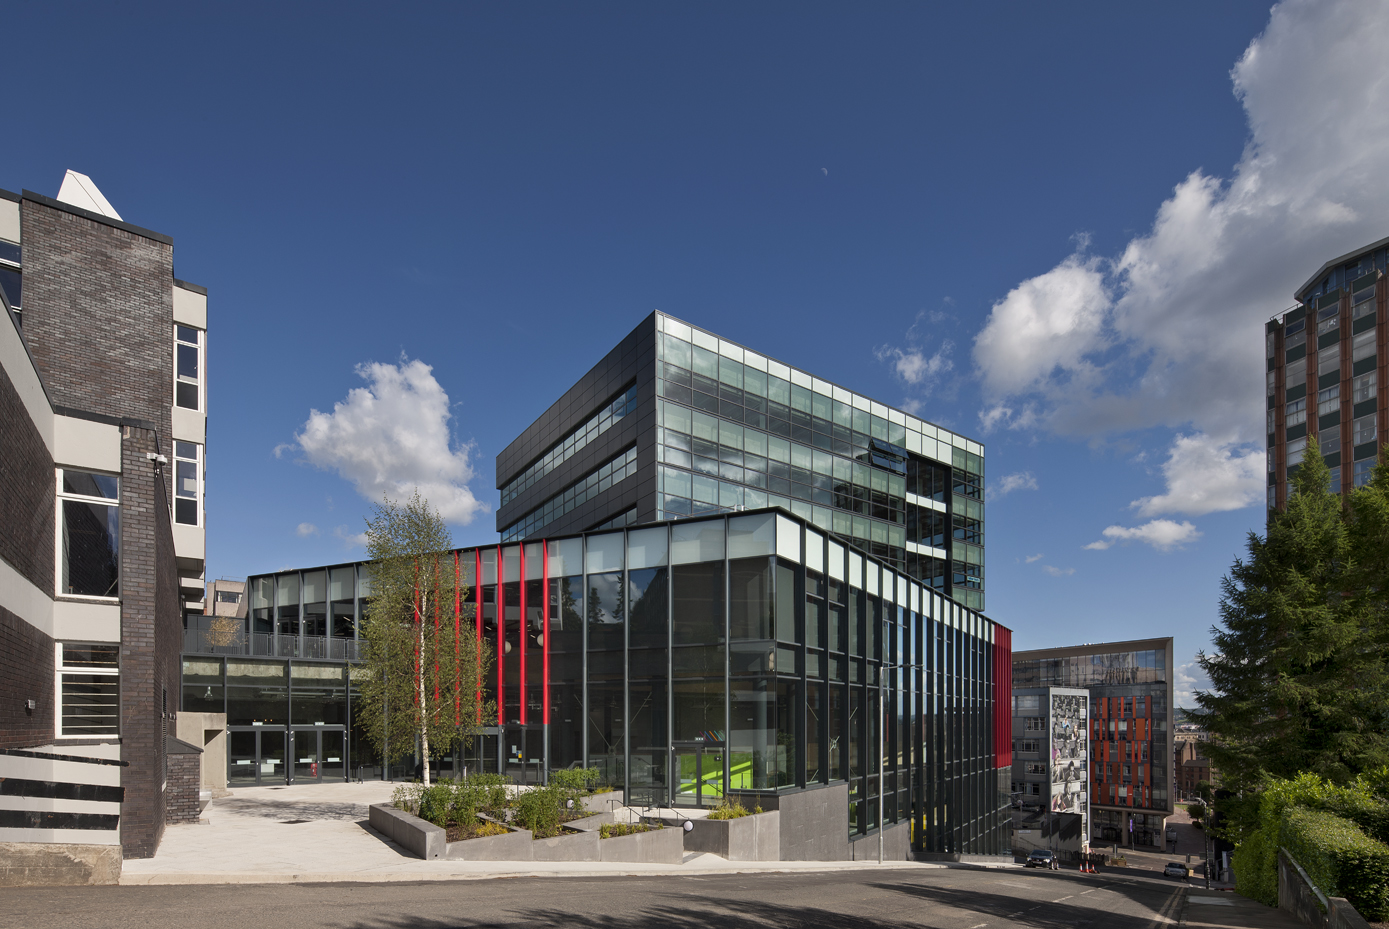 BDP picks up retrofit award for University of Strathclyde project